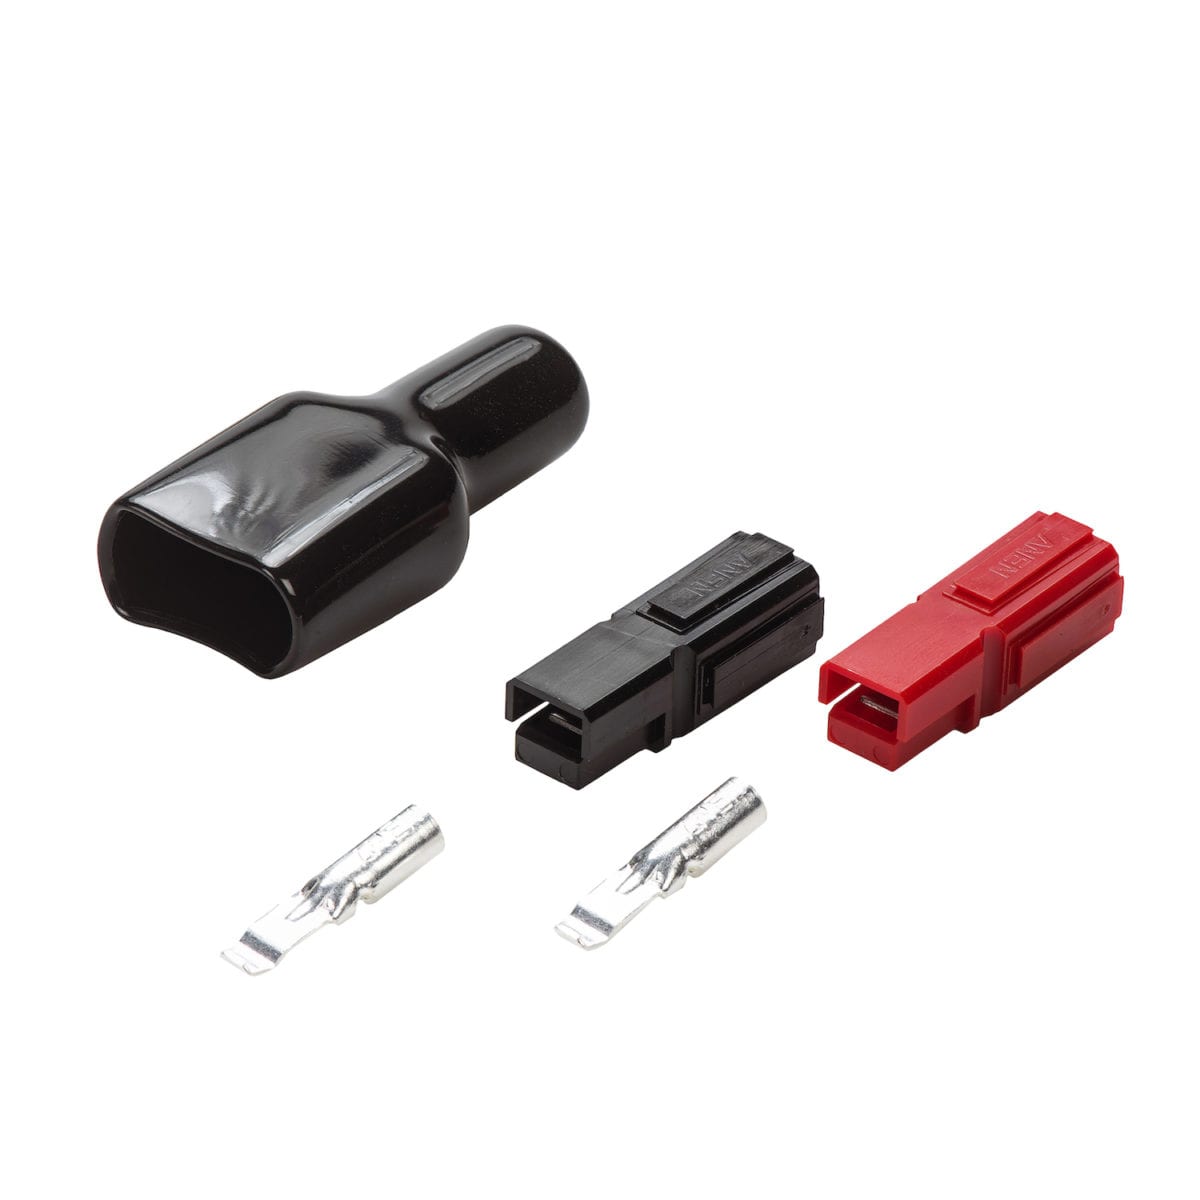 Anen PA-45 Connector for Quick Connect Fish Finder